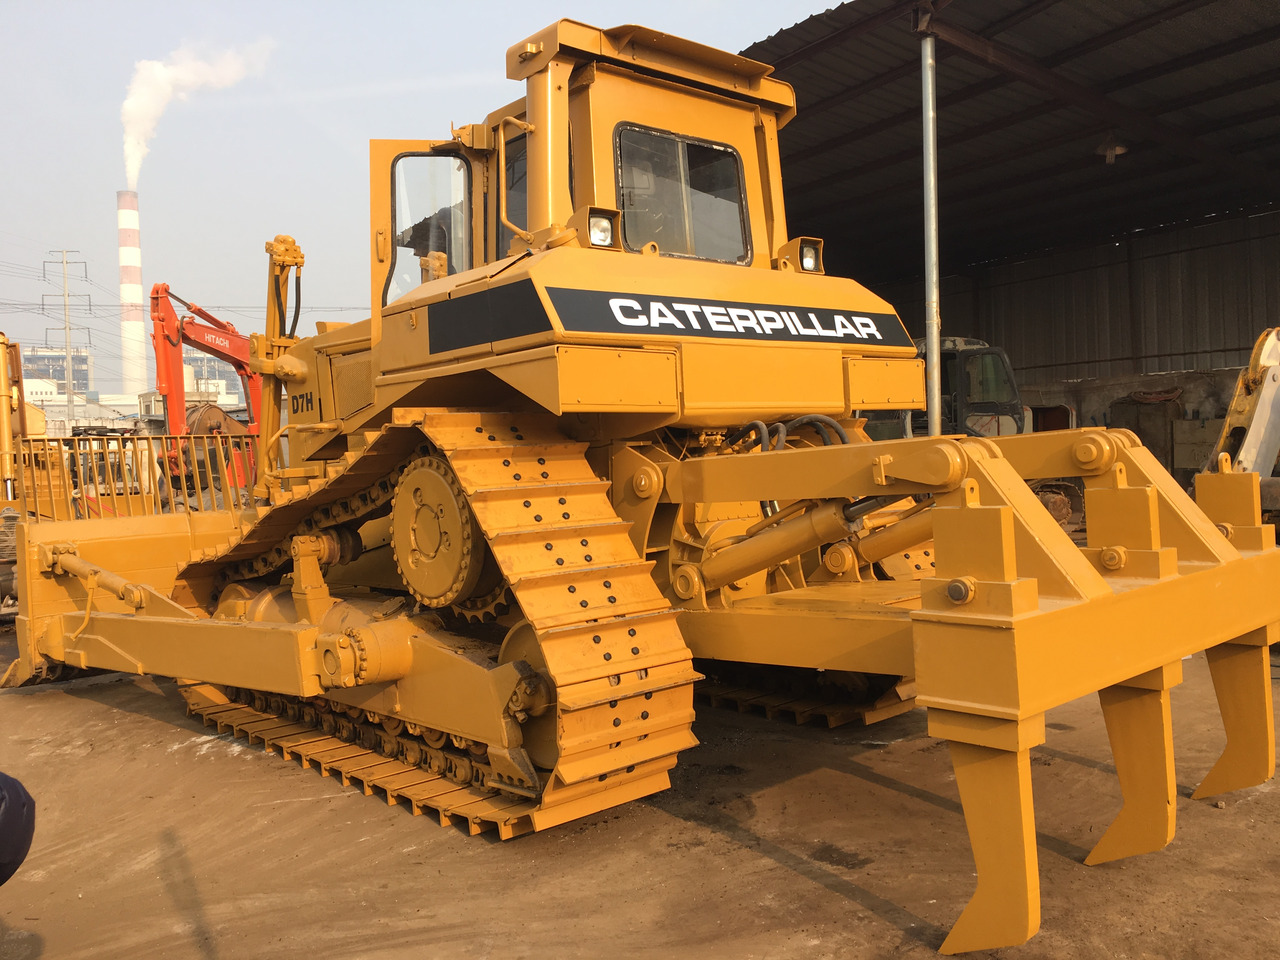 Bulldozer neuf Famous brand CATERPILLAR D7H in good condition on sale: photos 2